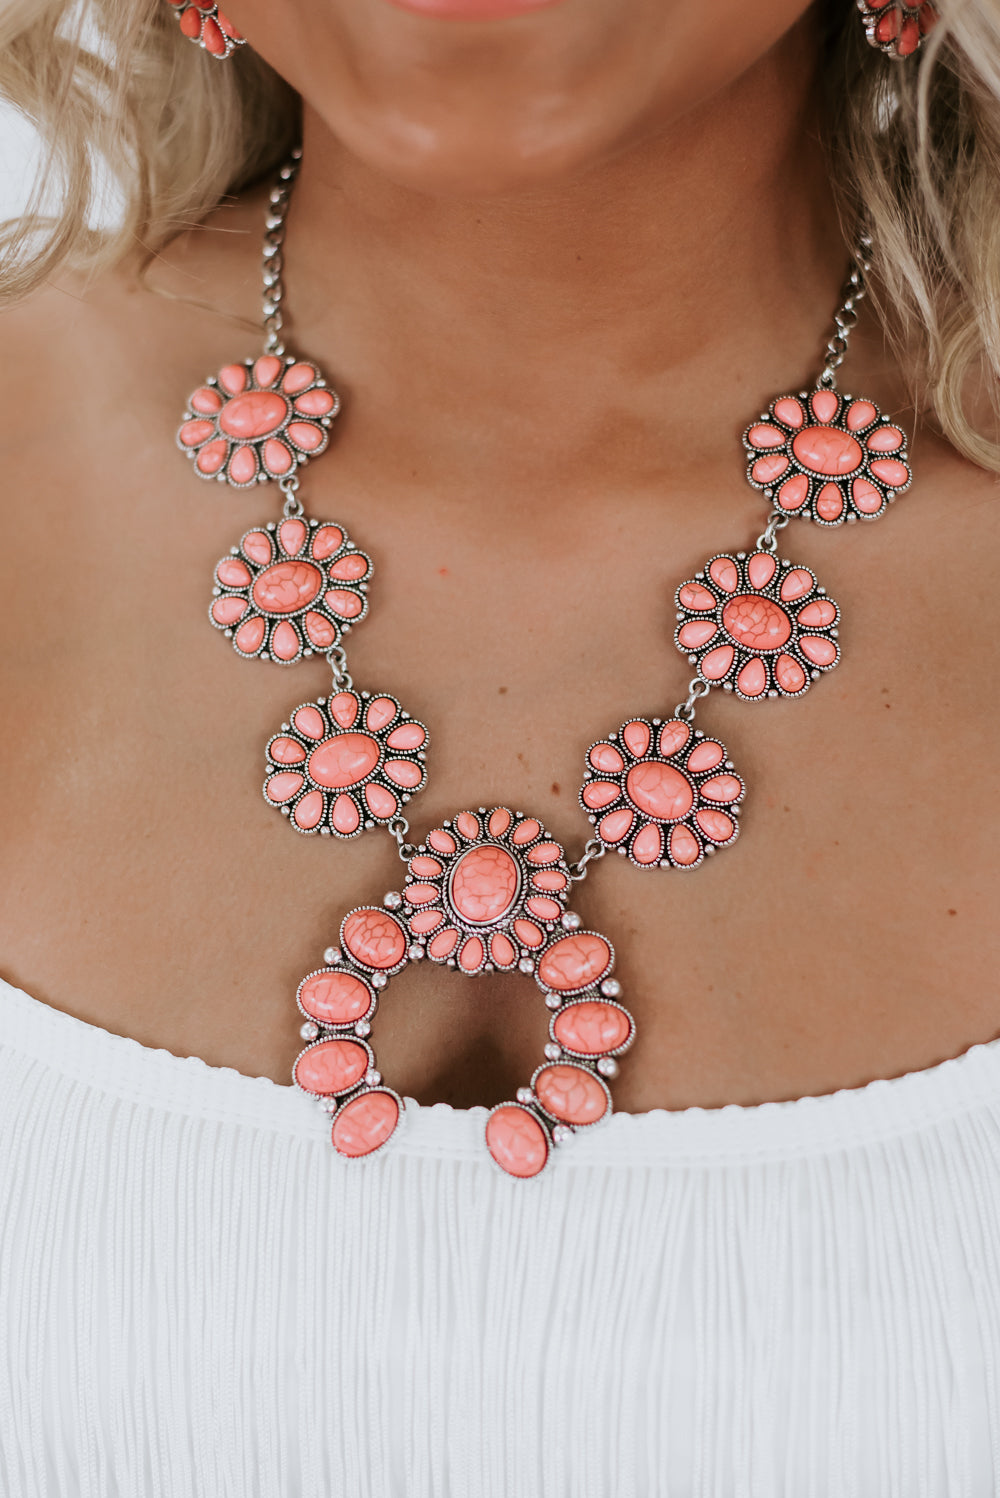 Bring On Blossoms Concho Necklace, Pink